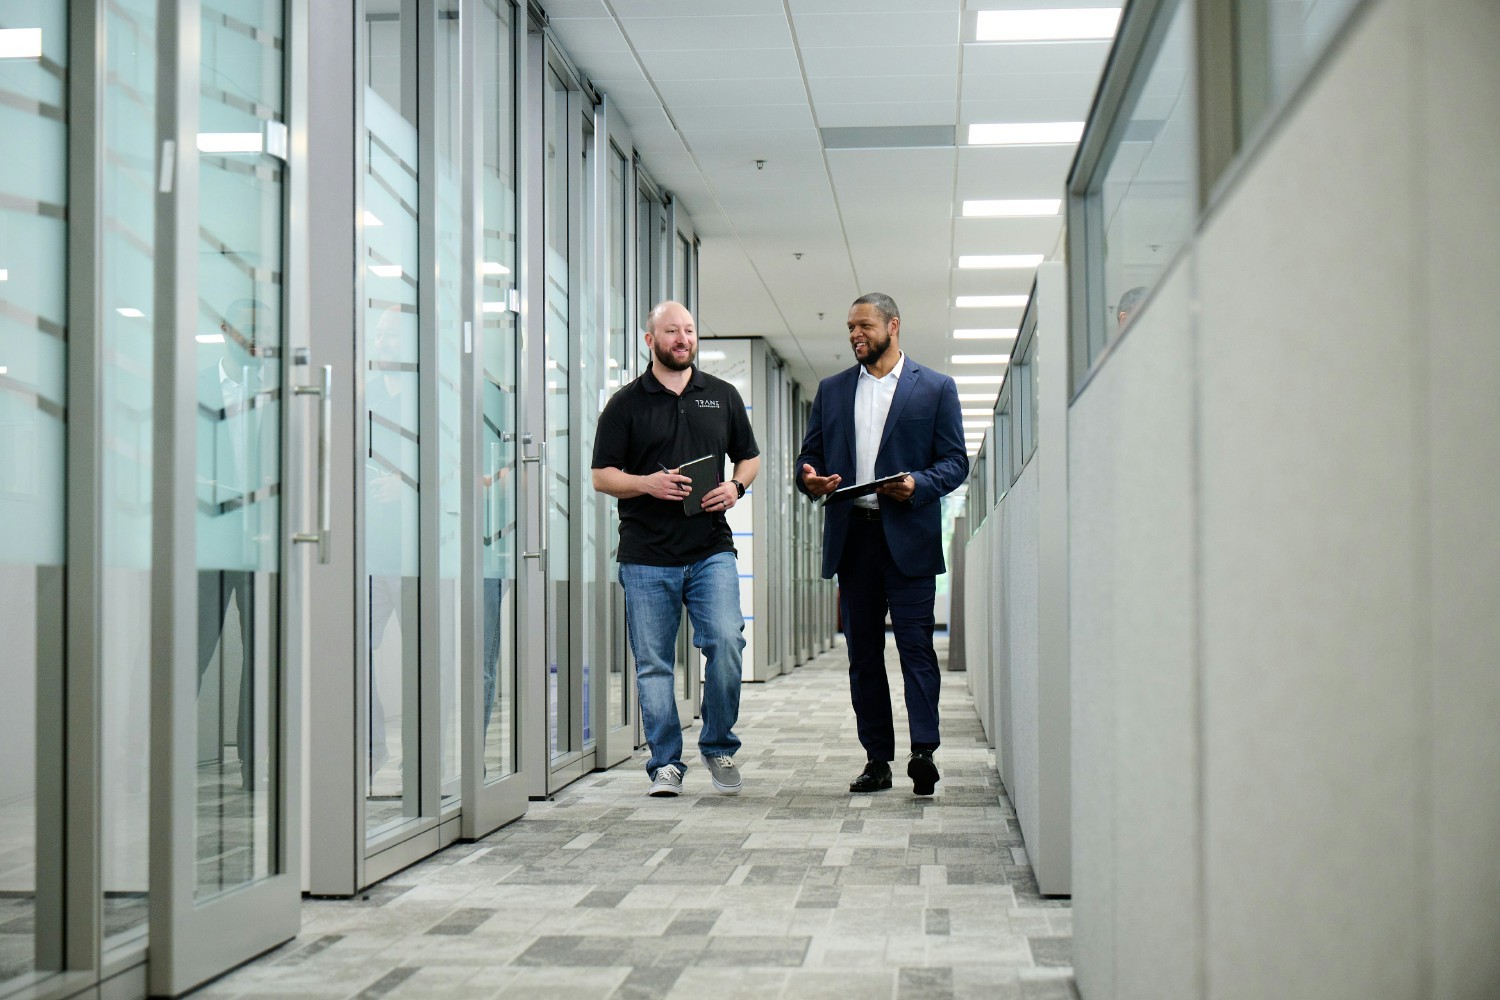 Two Trane Technologies employees have a conversation at work